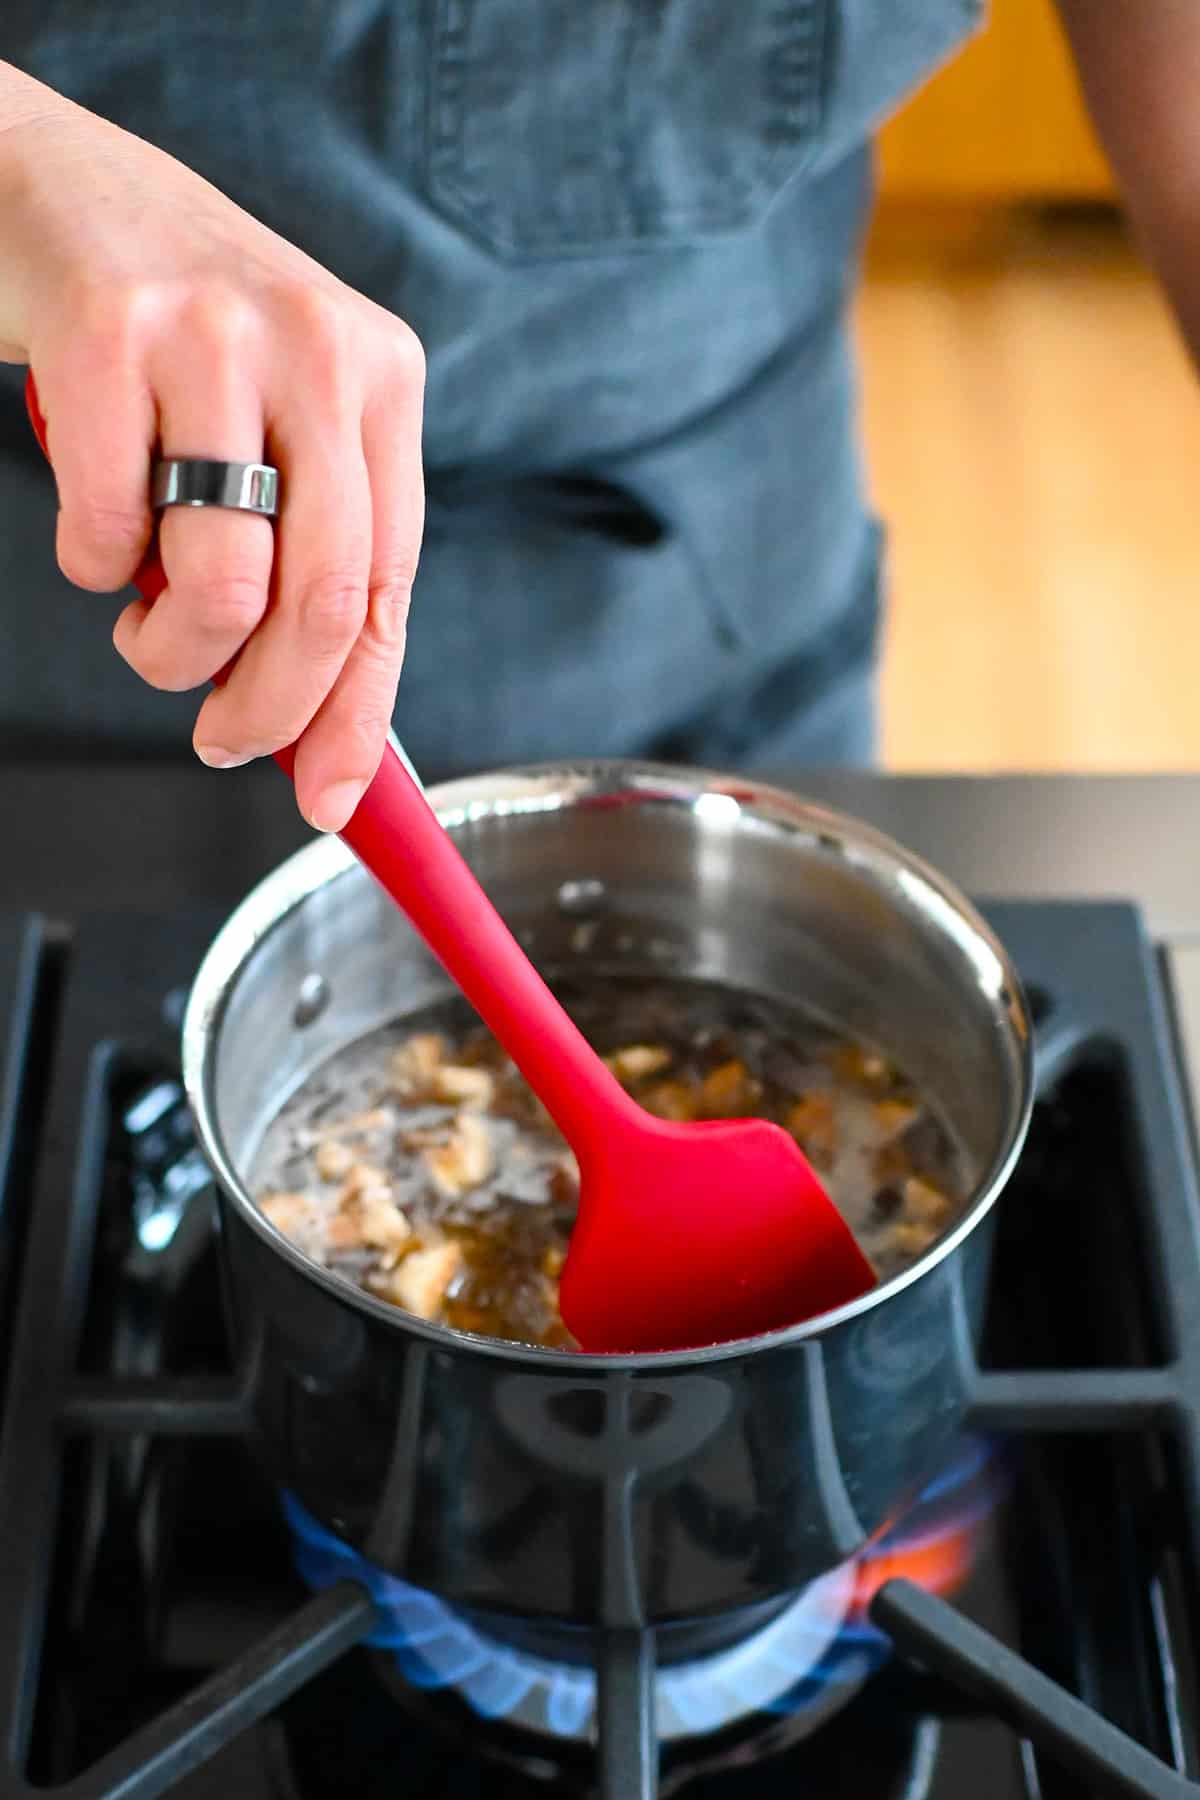 A red silicone spatula is used to stir the vegan fish sauce simmering in a small saucepan.